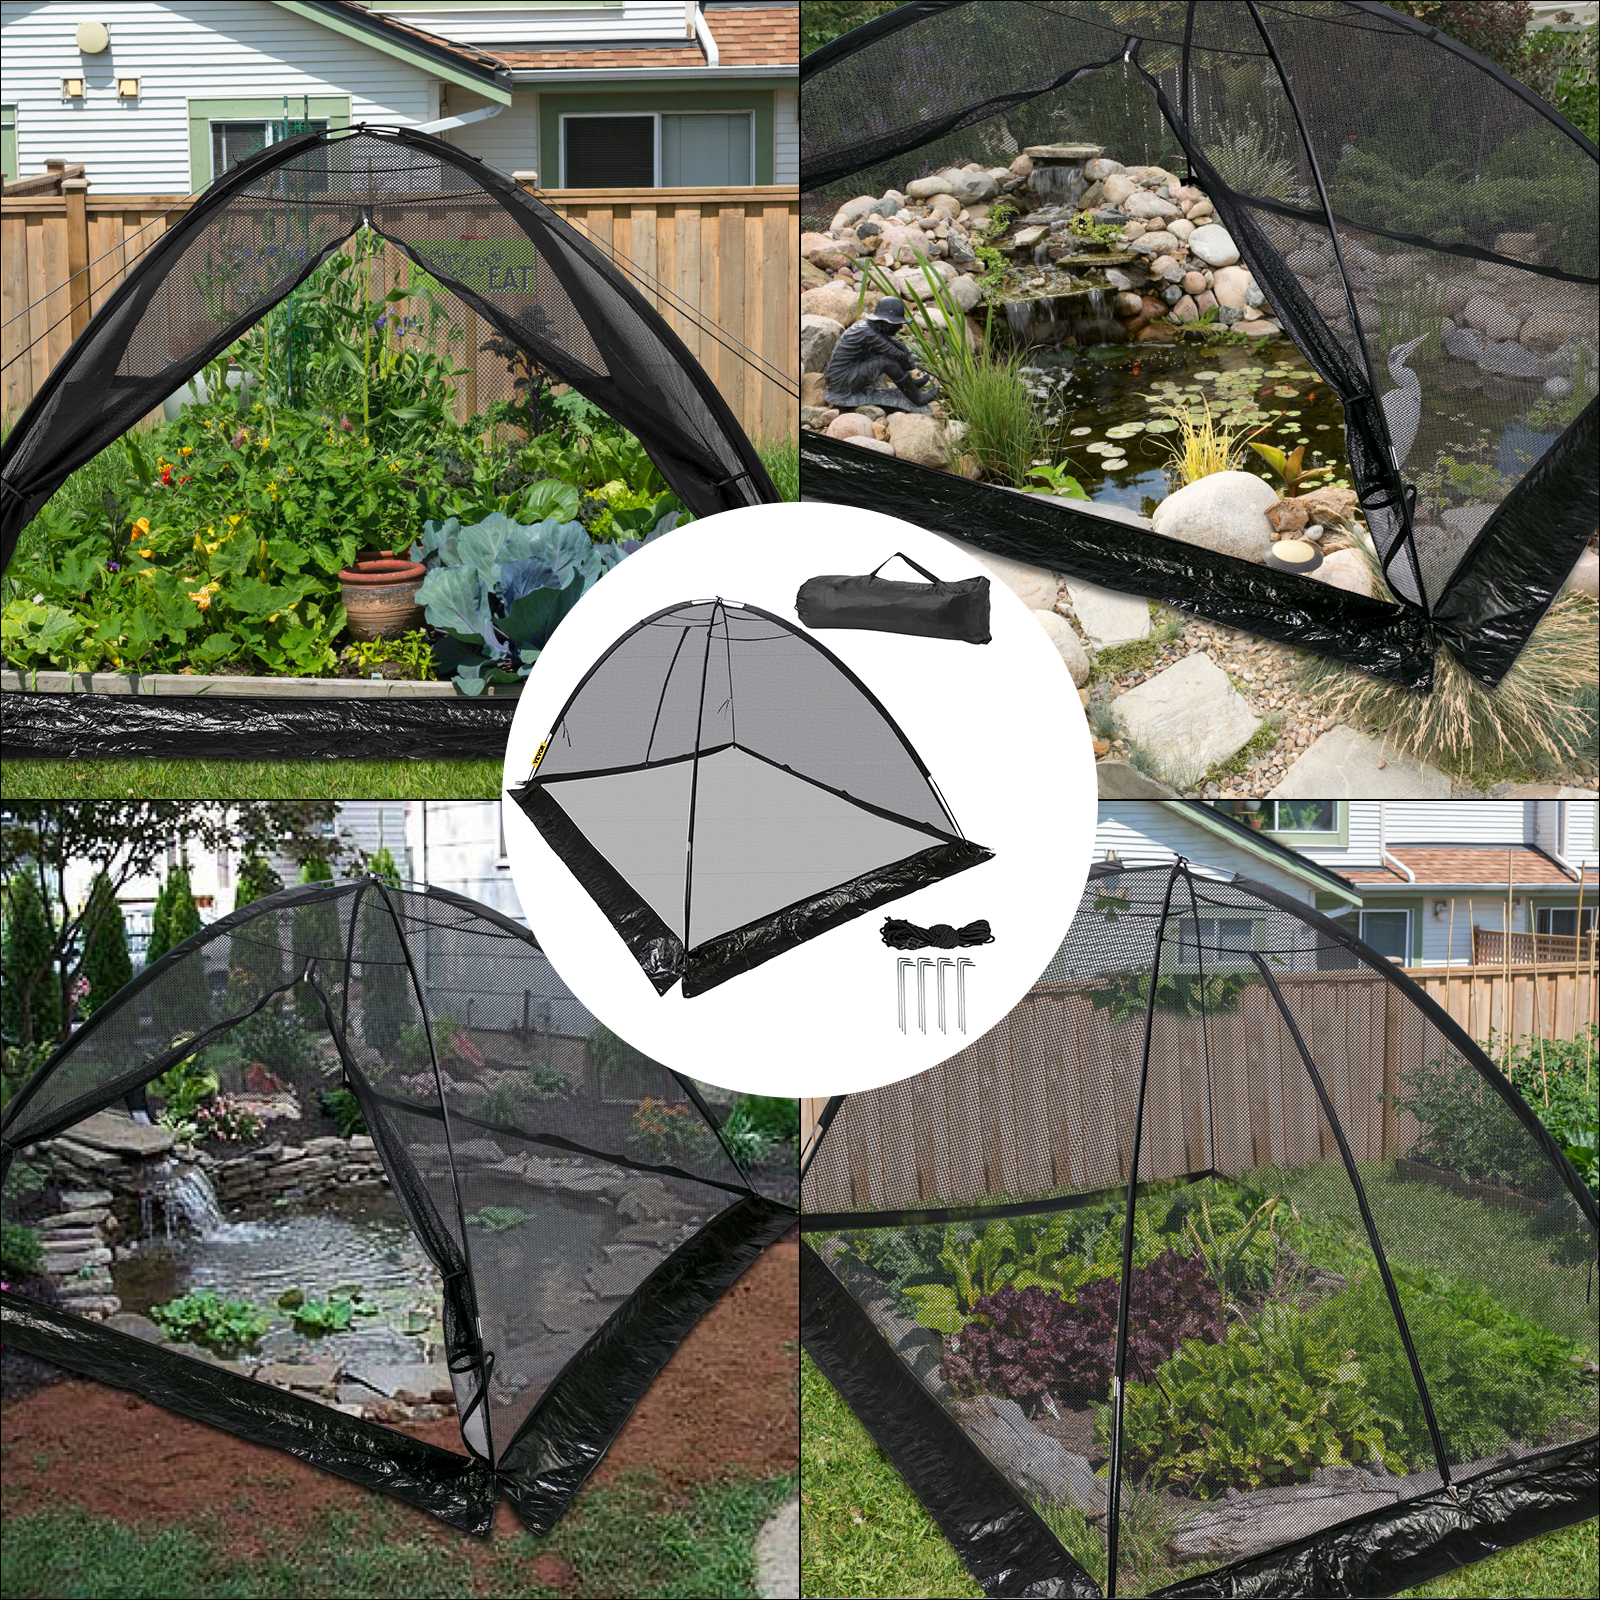 https://d2qc09rl1gfuof.cloudfront.net/product/HYBHZ7X9FT0000001/pond-cover-m100-7.jpg